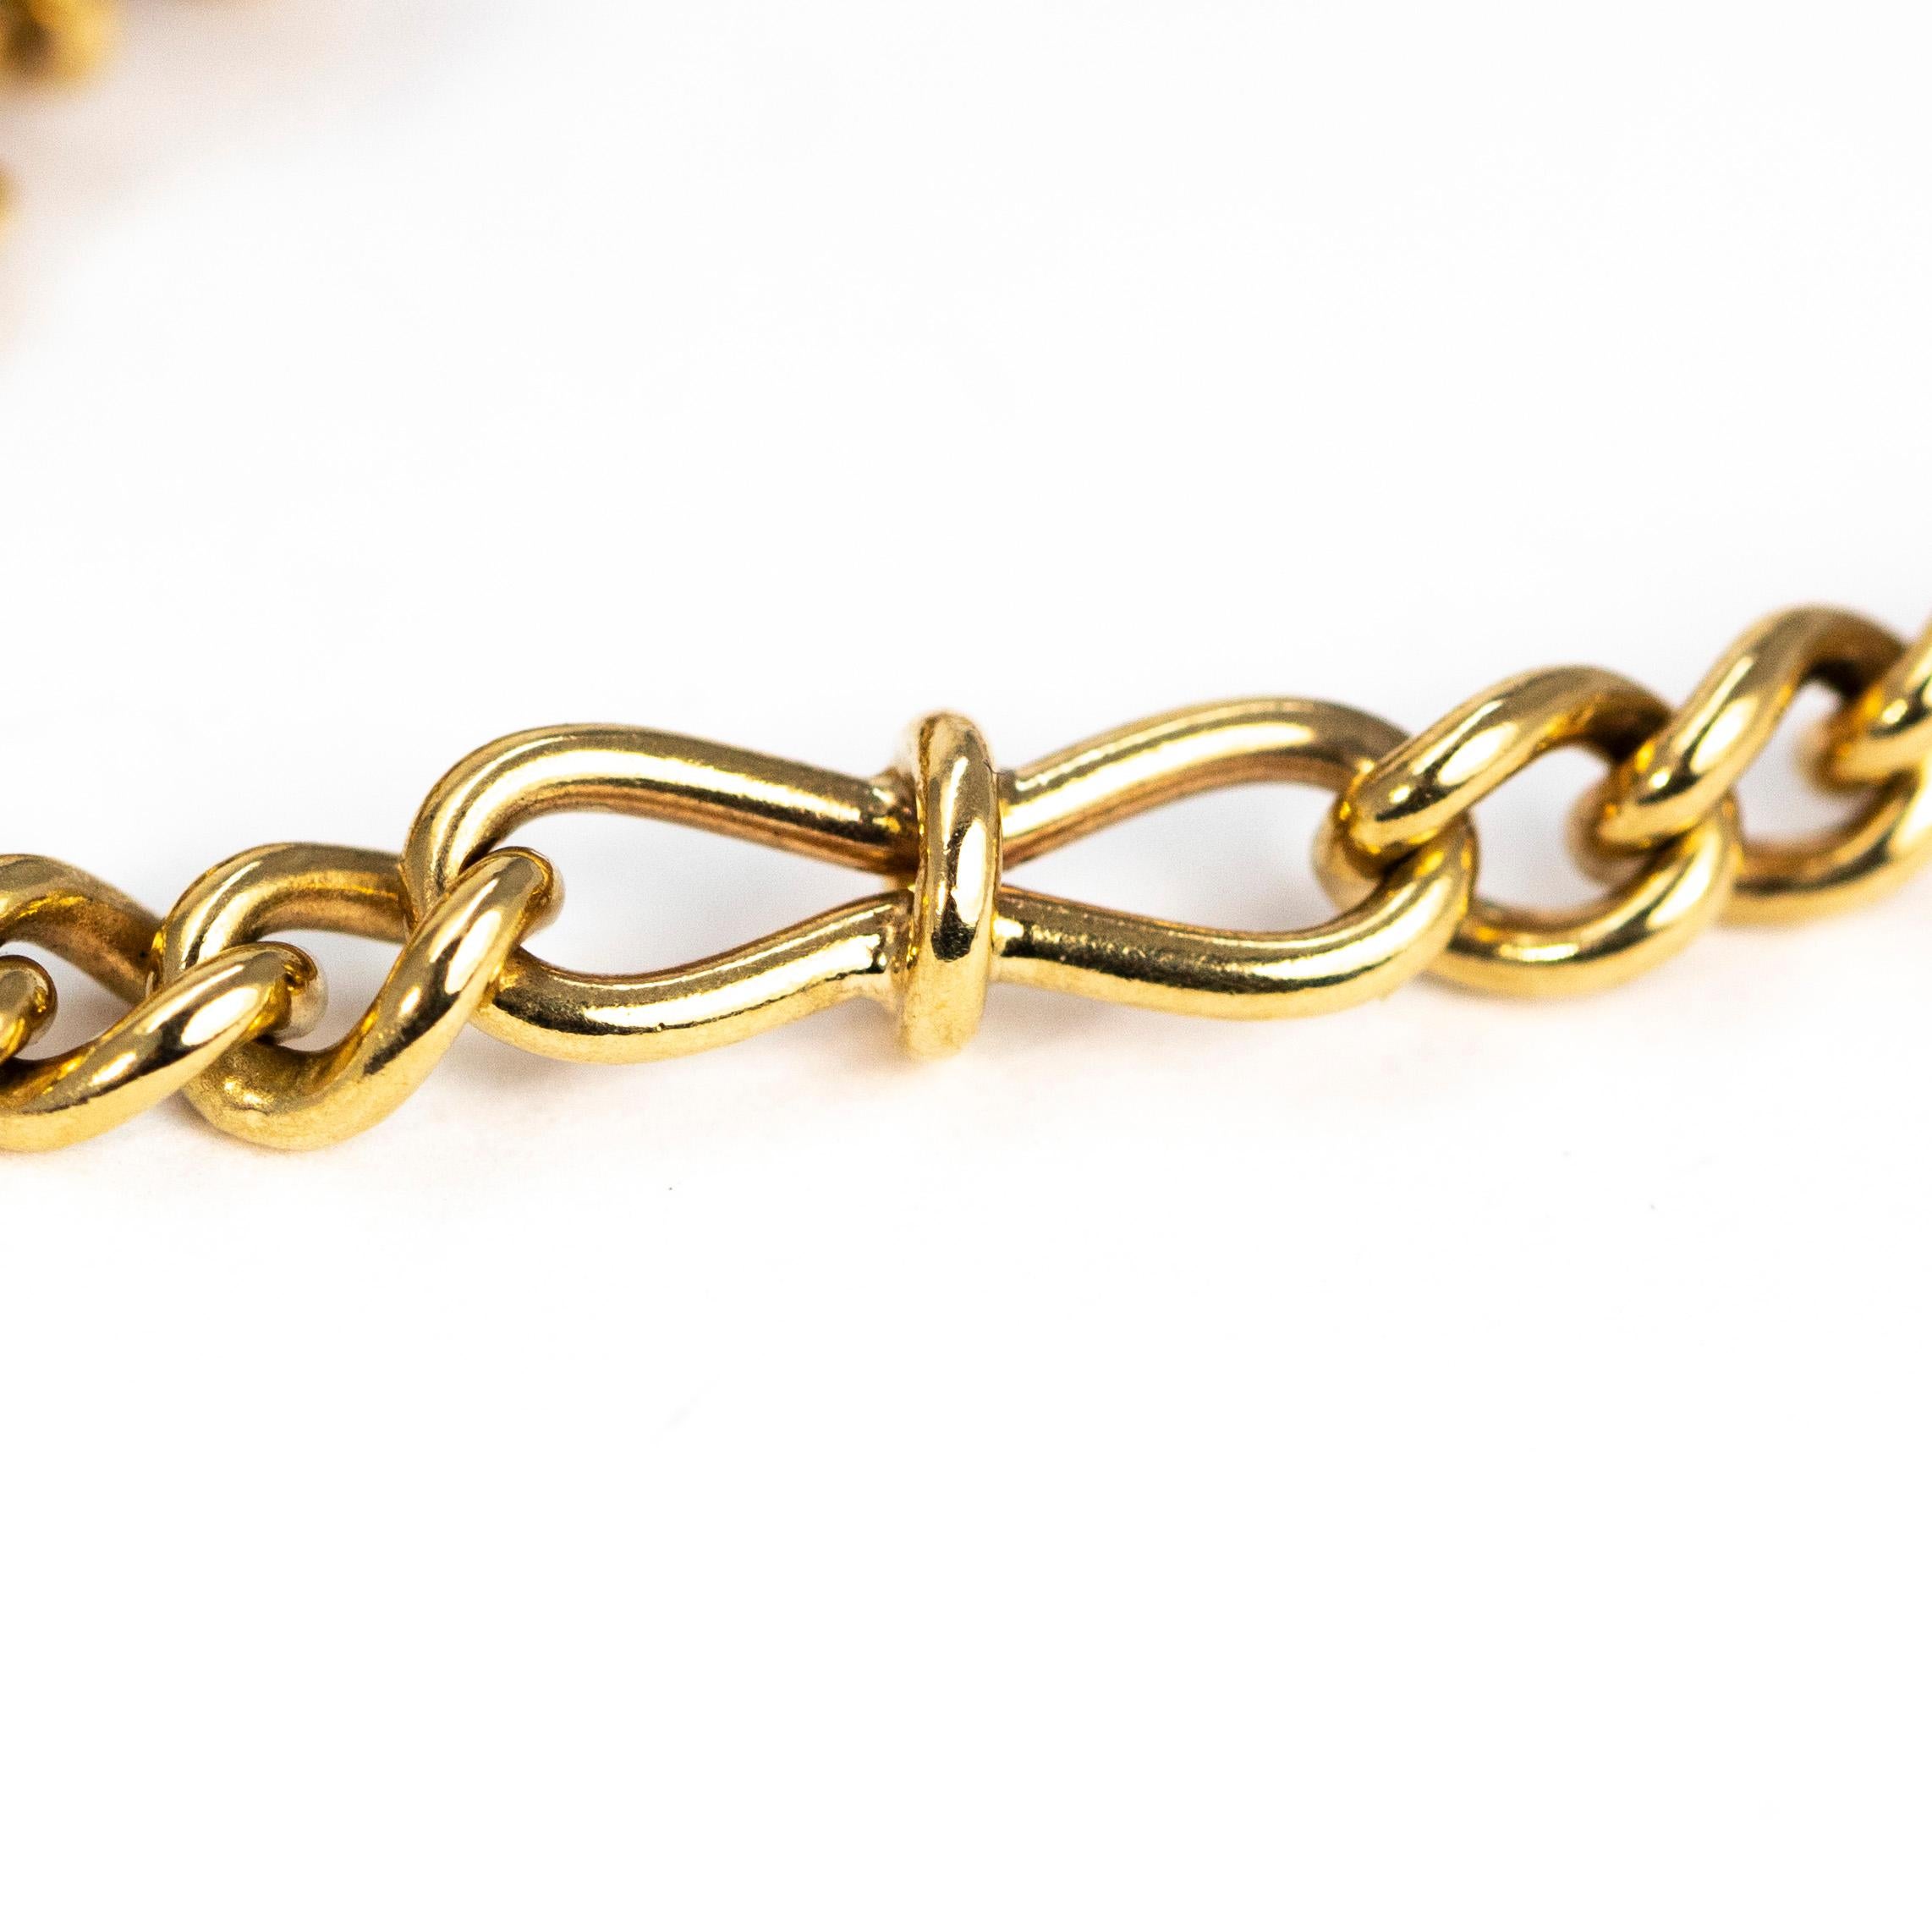 This gorgeous glossy gold chain is modelled out of 9 carat gold and is made up of a mixture of curb link and figure of eight links. This necklace is gorgeously packed with detail and has a great weight to it. 

Length: 34inches 
Chain Width: